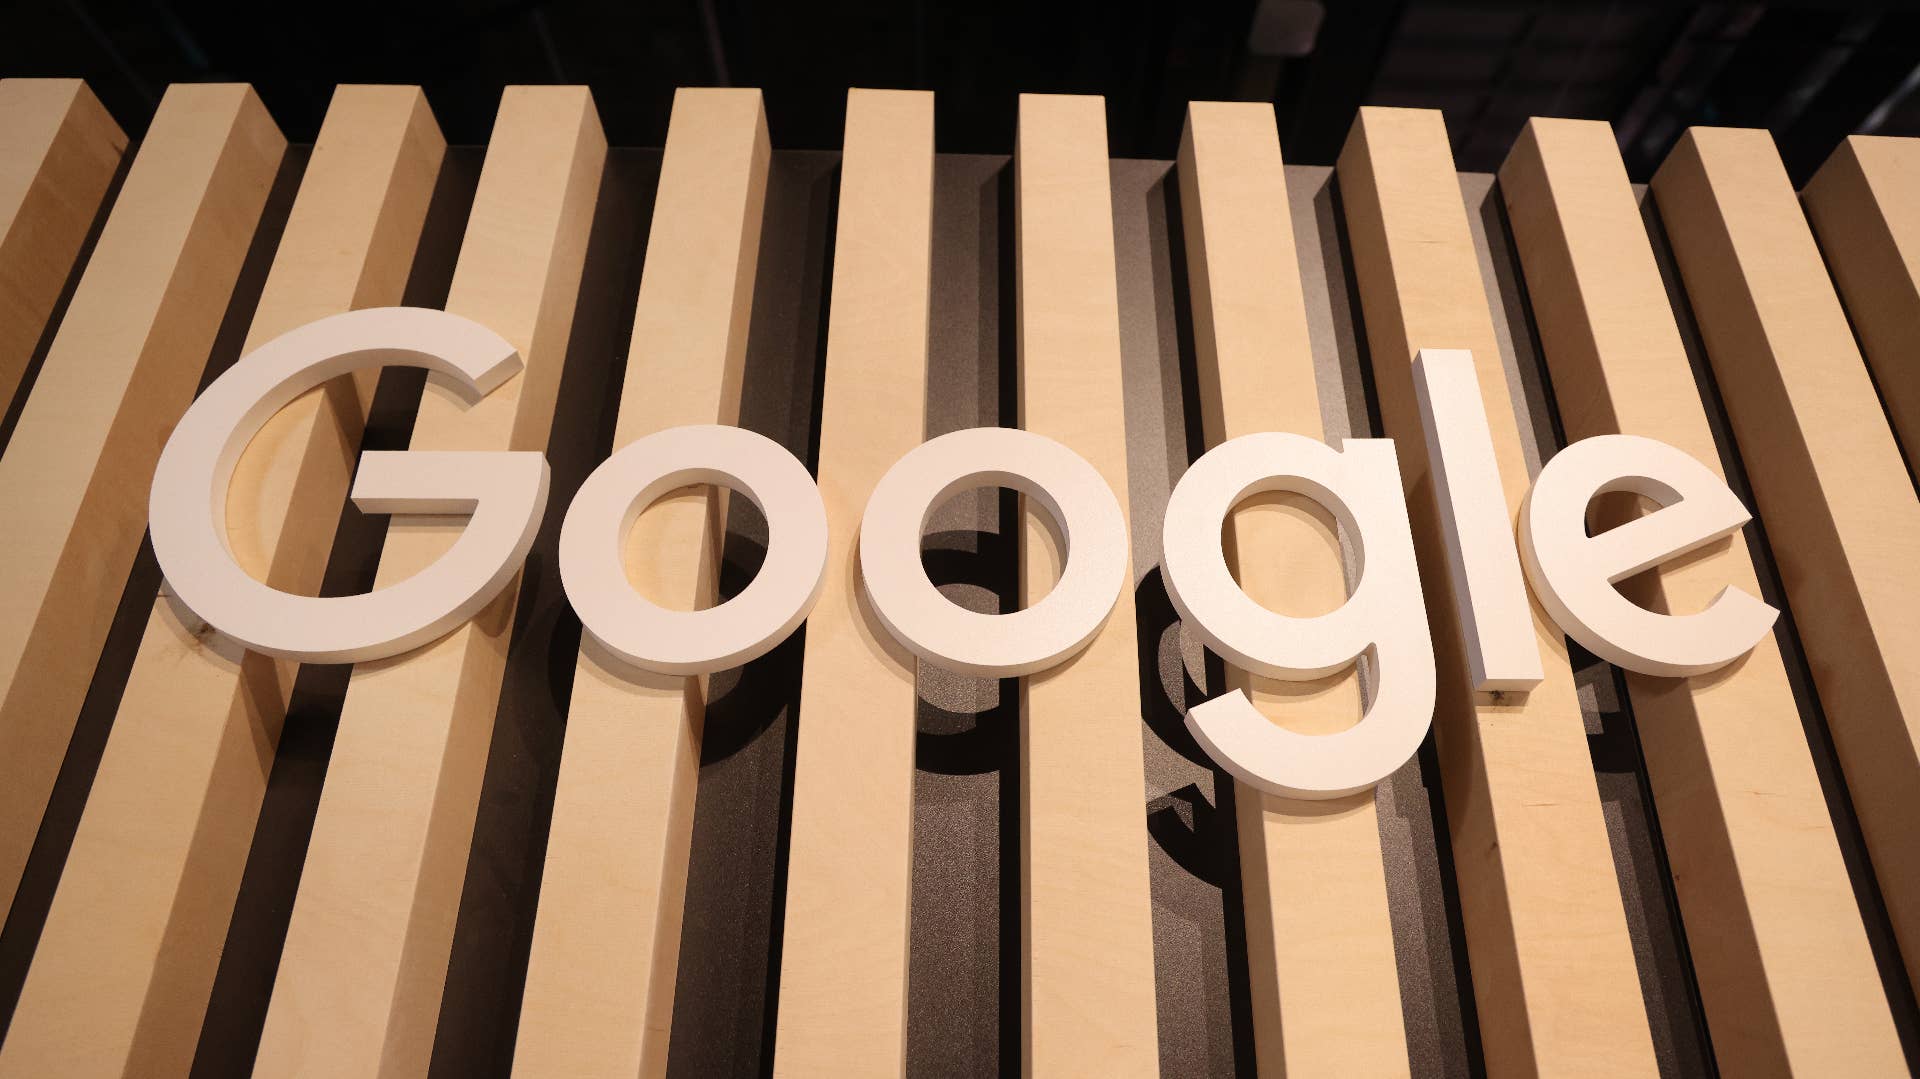 A wooden Google logo hangs at a stand.